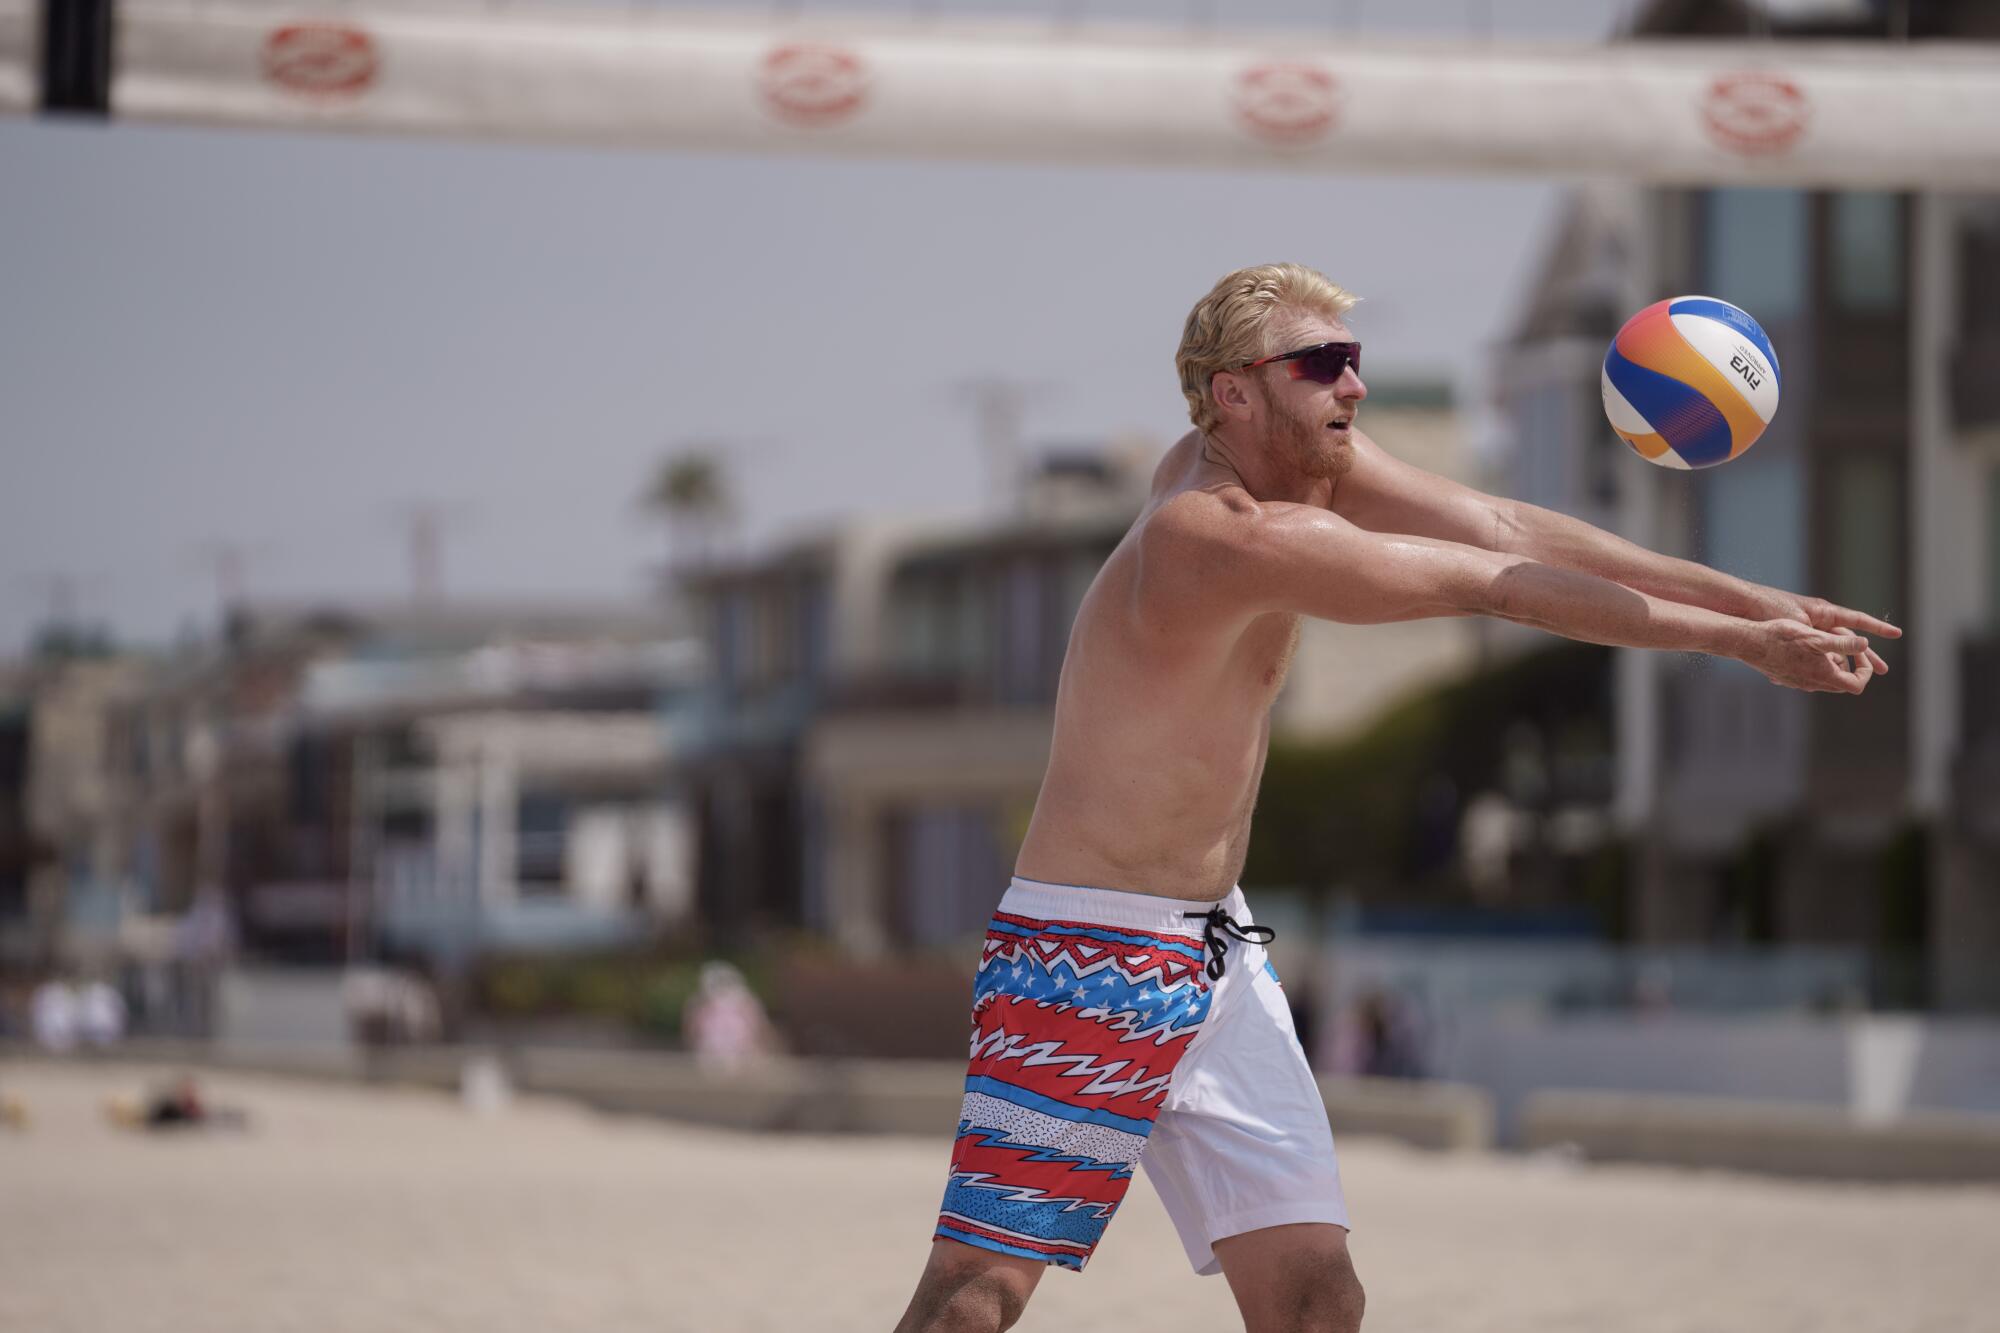 Chase Budinger takes part in a training session in Hermosa Beach.